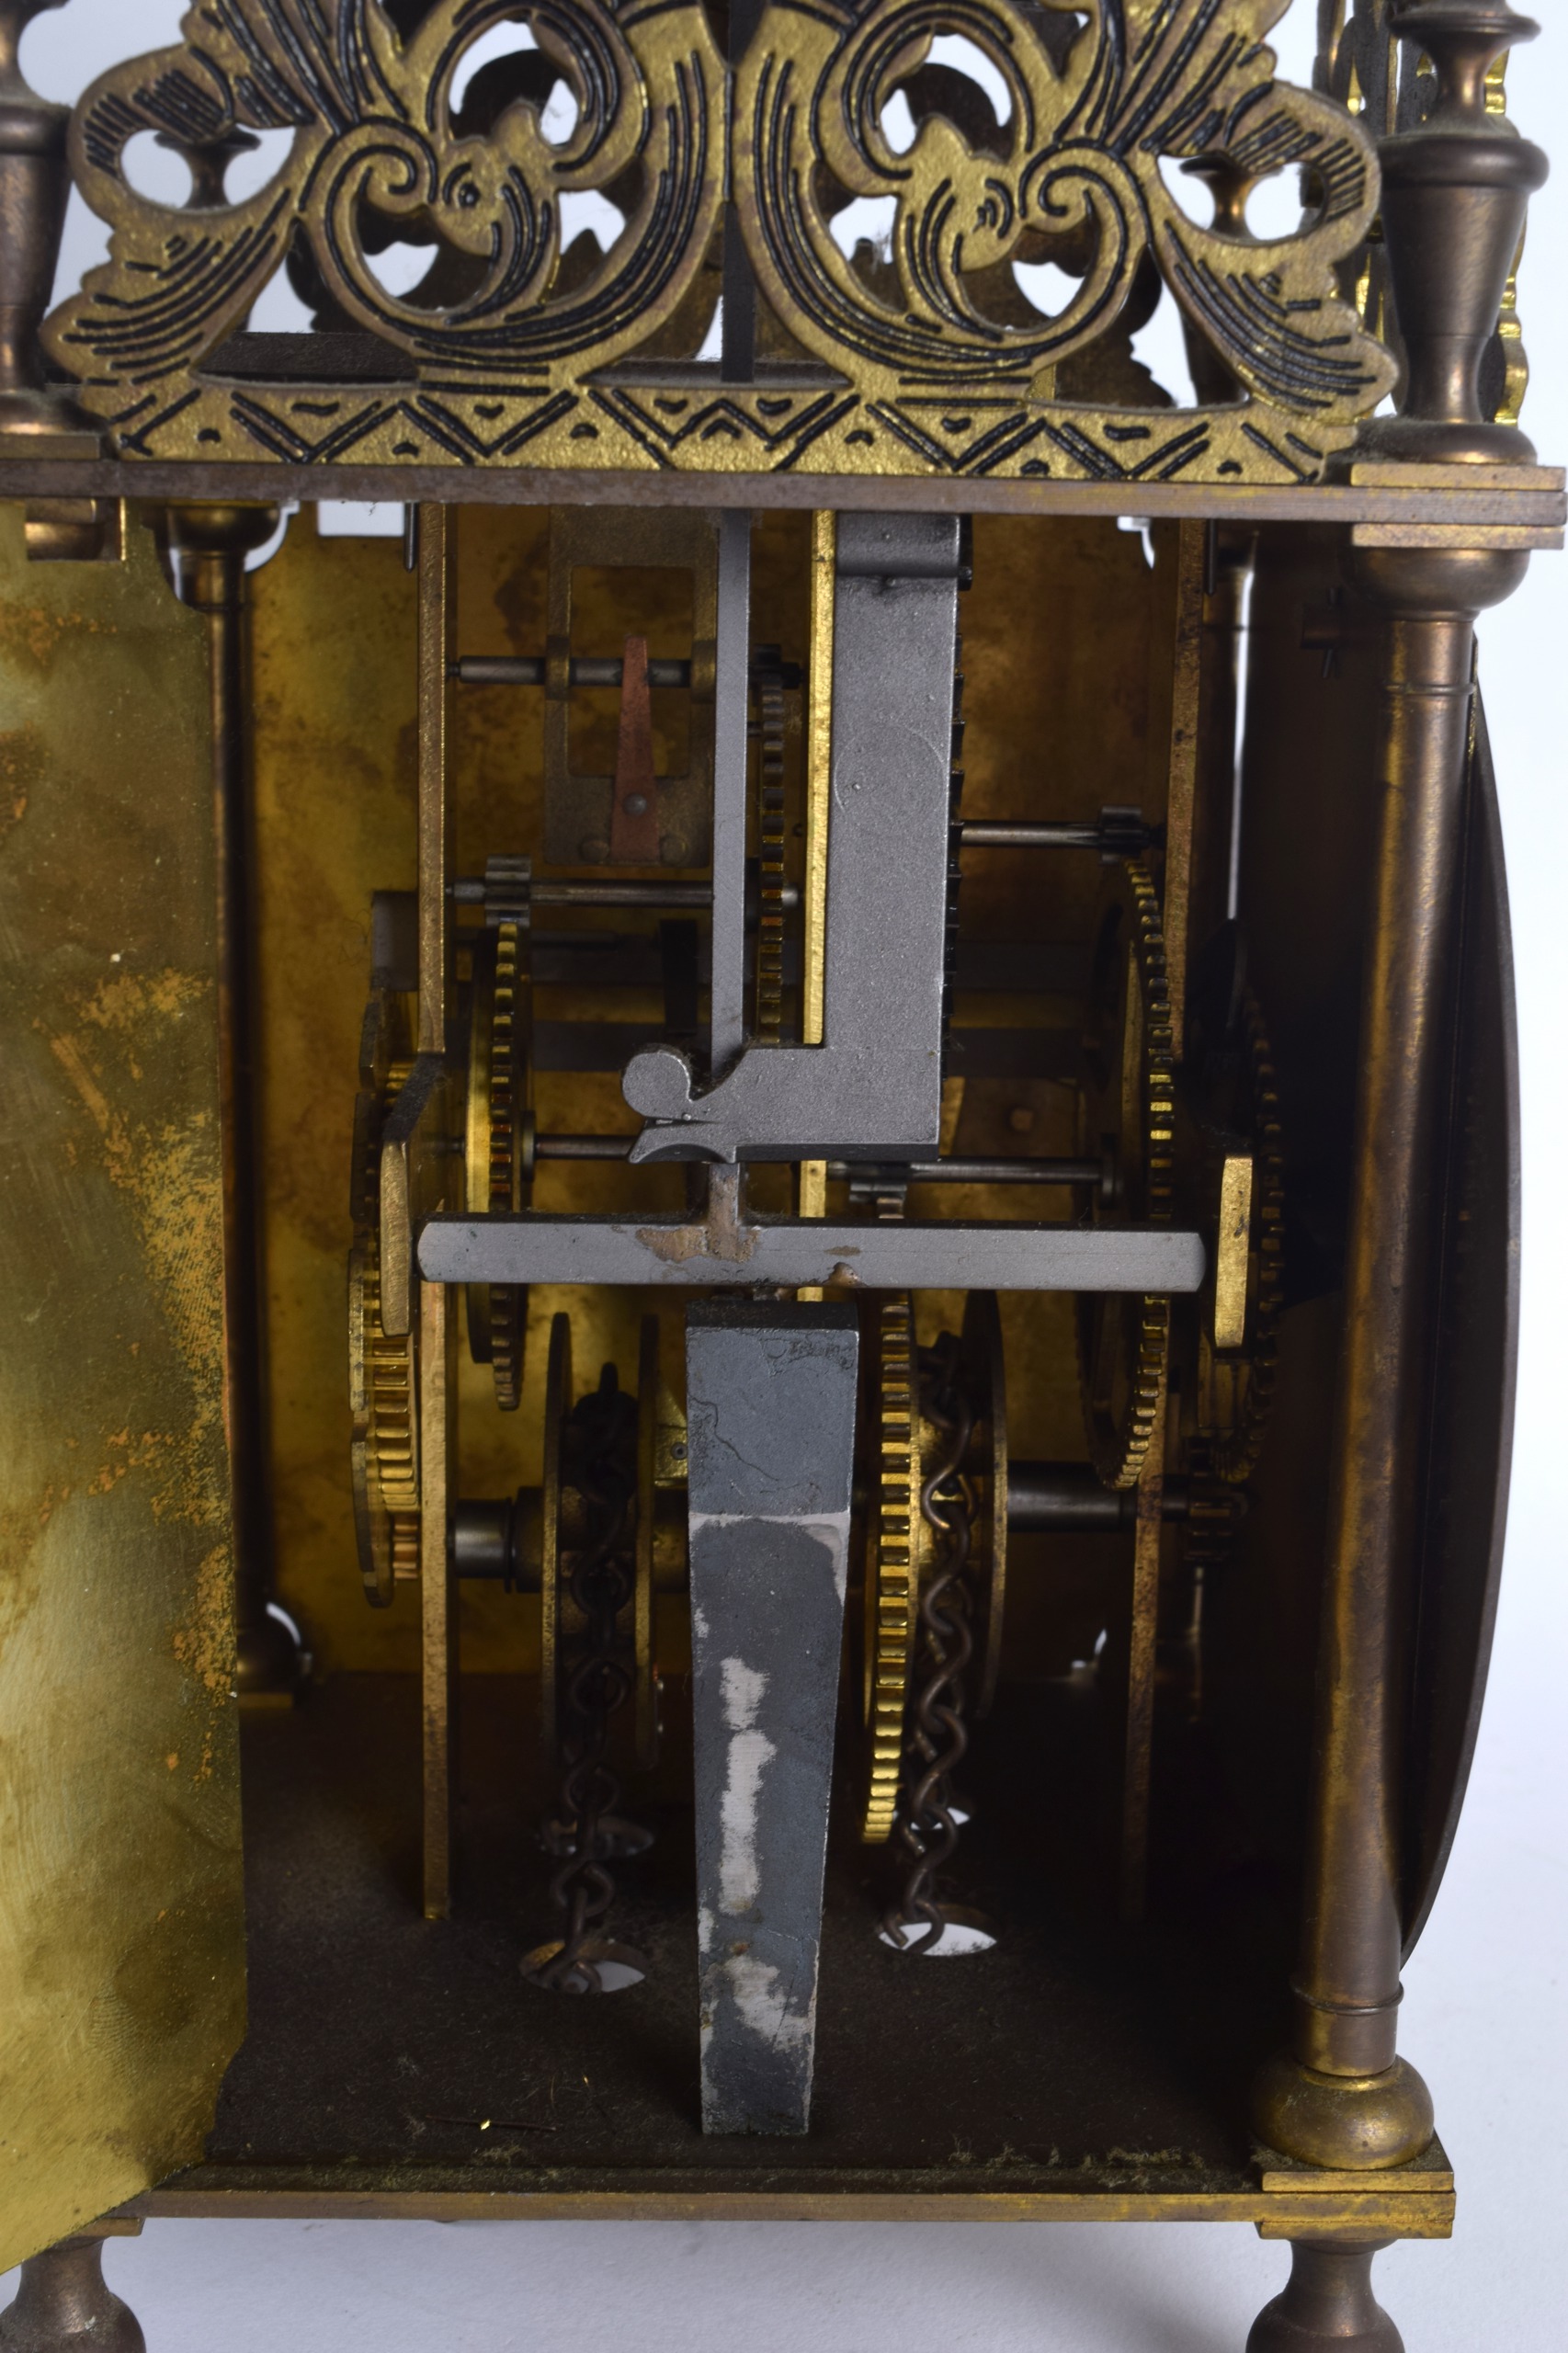 A BRASS LANTERN CLOCK by Thomas Moore of Ipswich, decorated with open work foliage. 37 cm x 15 cm. - Image 4 of 6